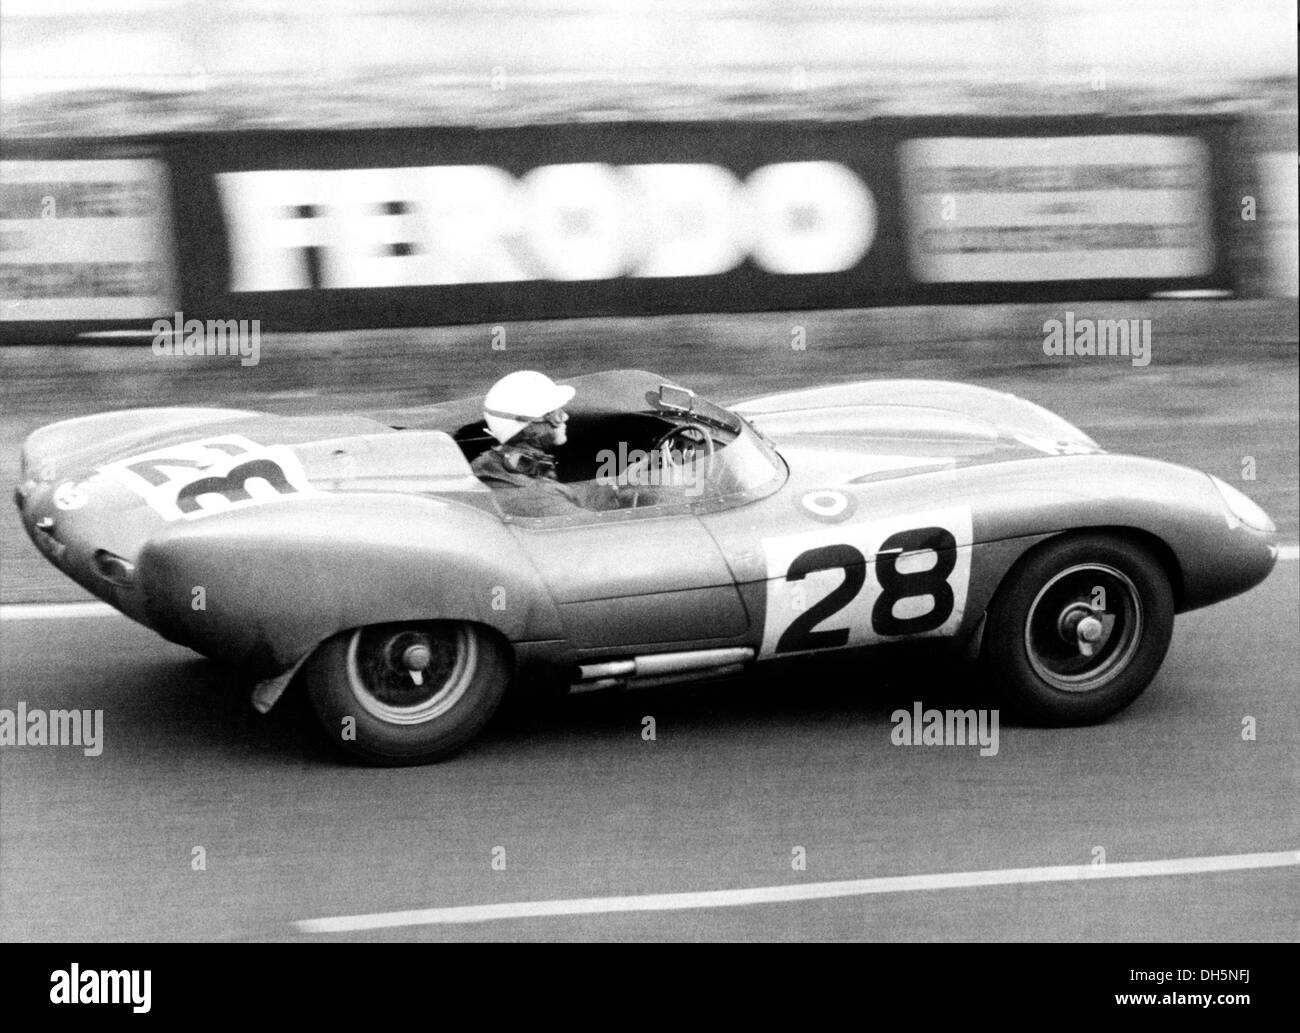 Peter Bolton-Dickie Stoop AC Ace LM Bristol which finished 8th at the Le Mans 24-Hours race, France 22nd June 1958. Stock Photo